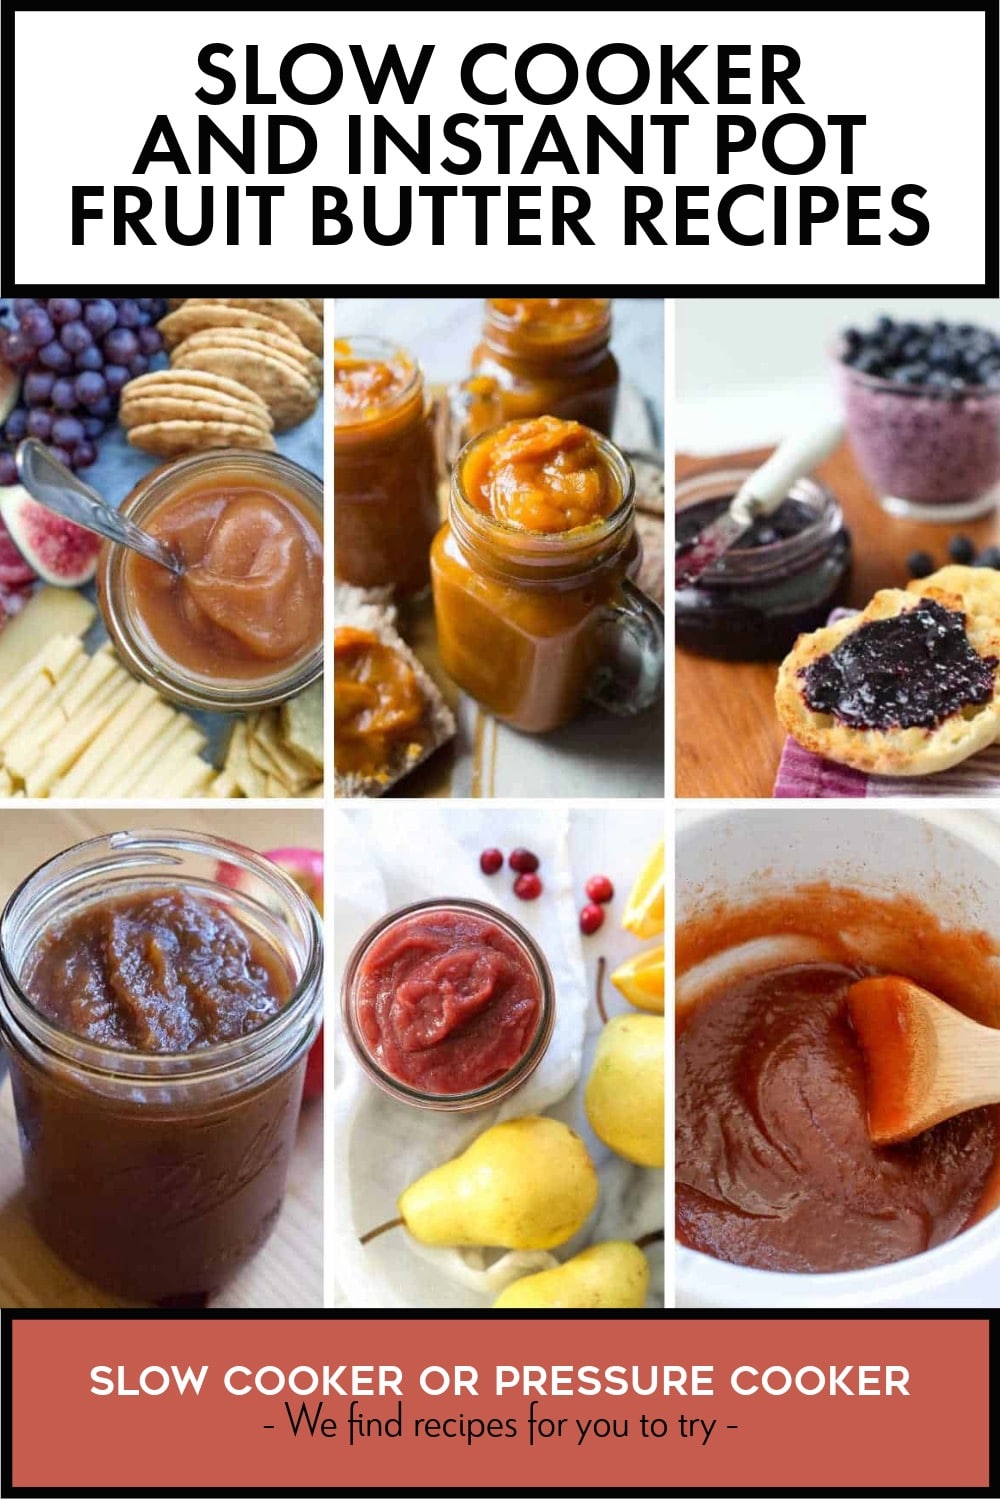 Pinterest image of Slow Cooker and Instant Pot Fruit Butter Recipes